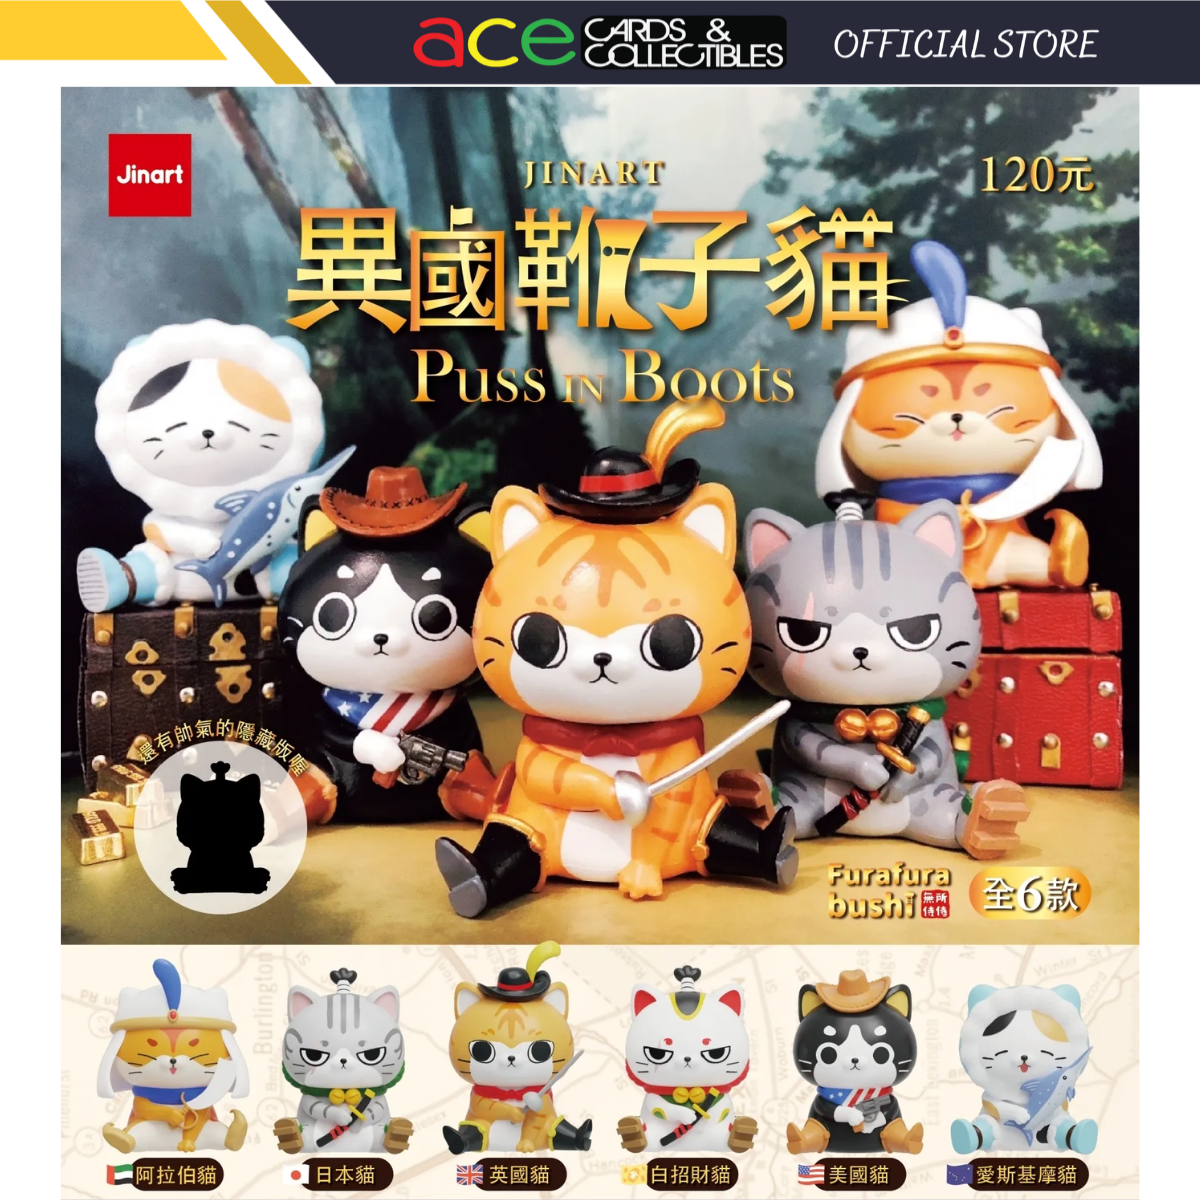 Jinart x Puss In Boots Cat Series-Display Box (6pcs)-Jinart-Ace Cards & Collectibles